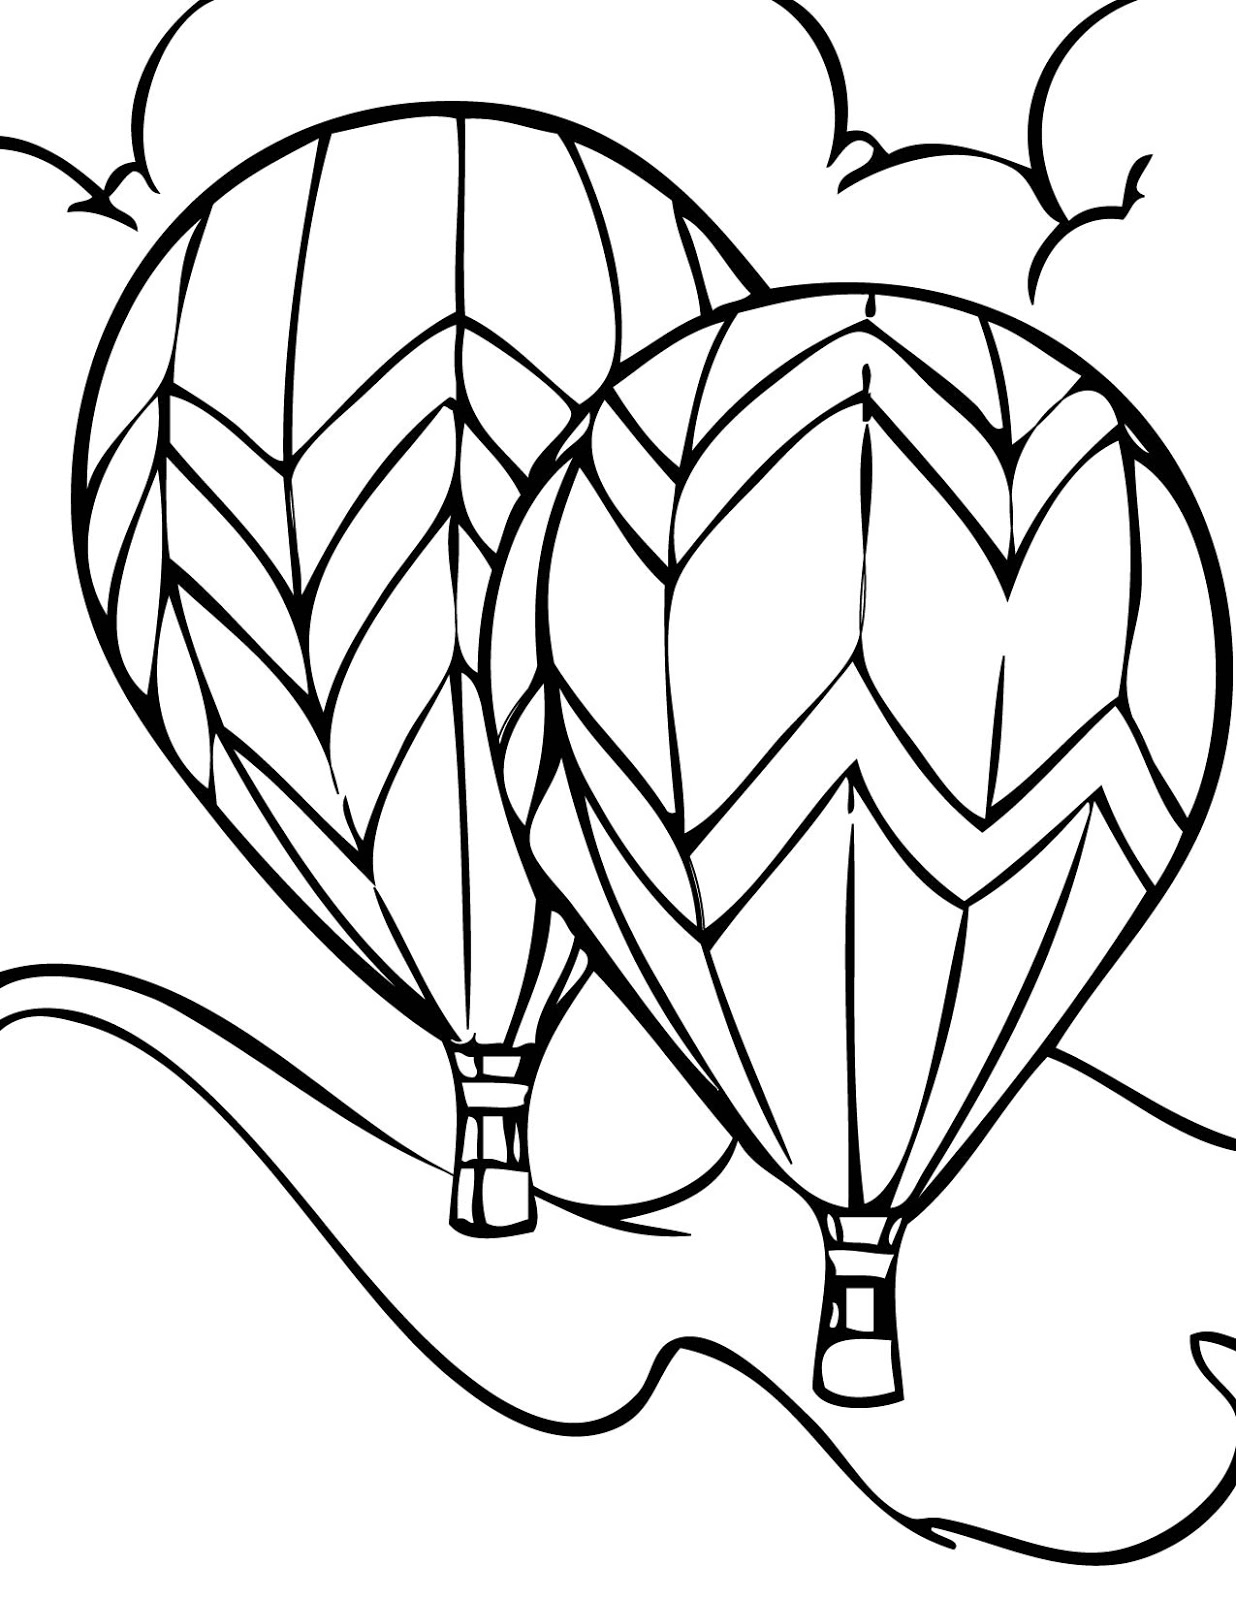 balloons to color fun learn free worksheets for kid ภาพระบายสพาหนะชนด balloons to color 